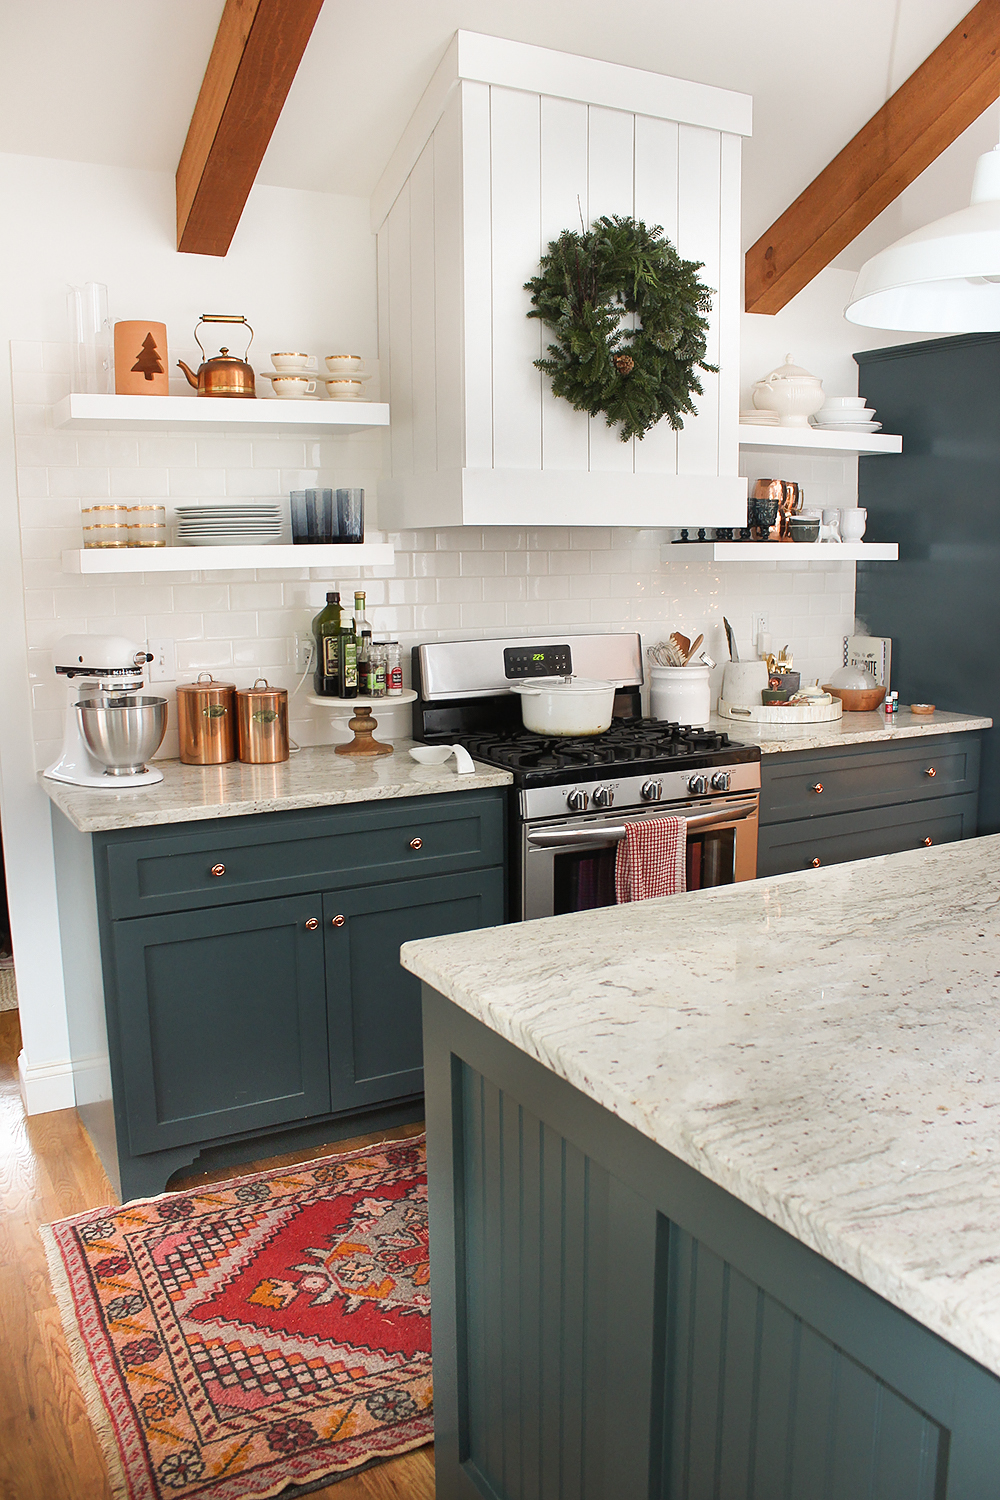 Choosing The Burrow Kitchen Cabinets